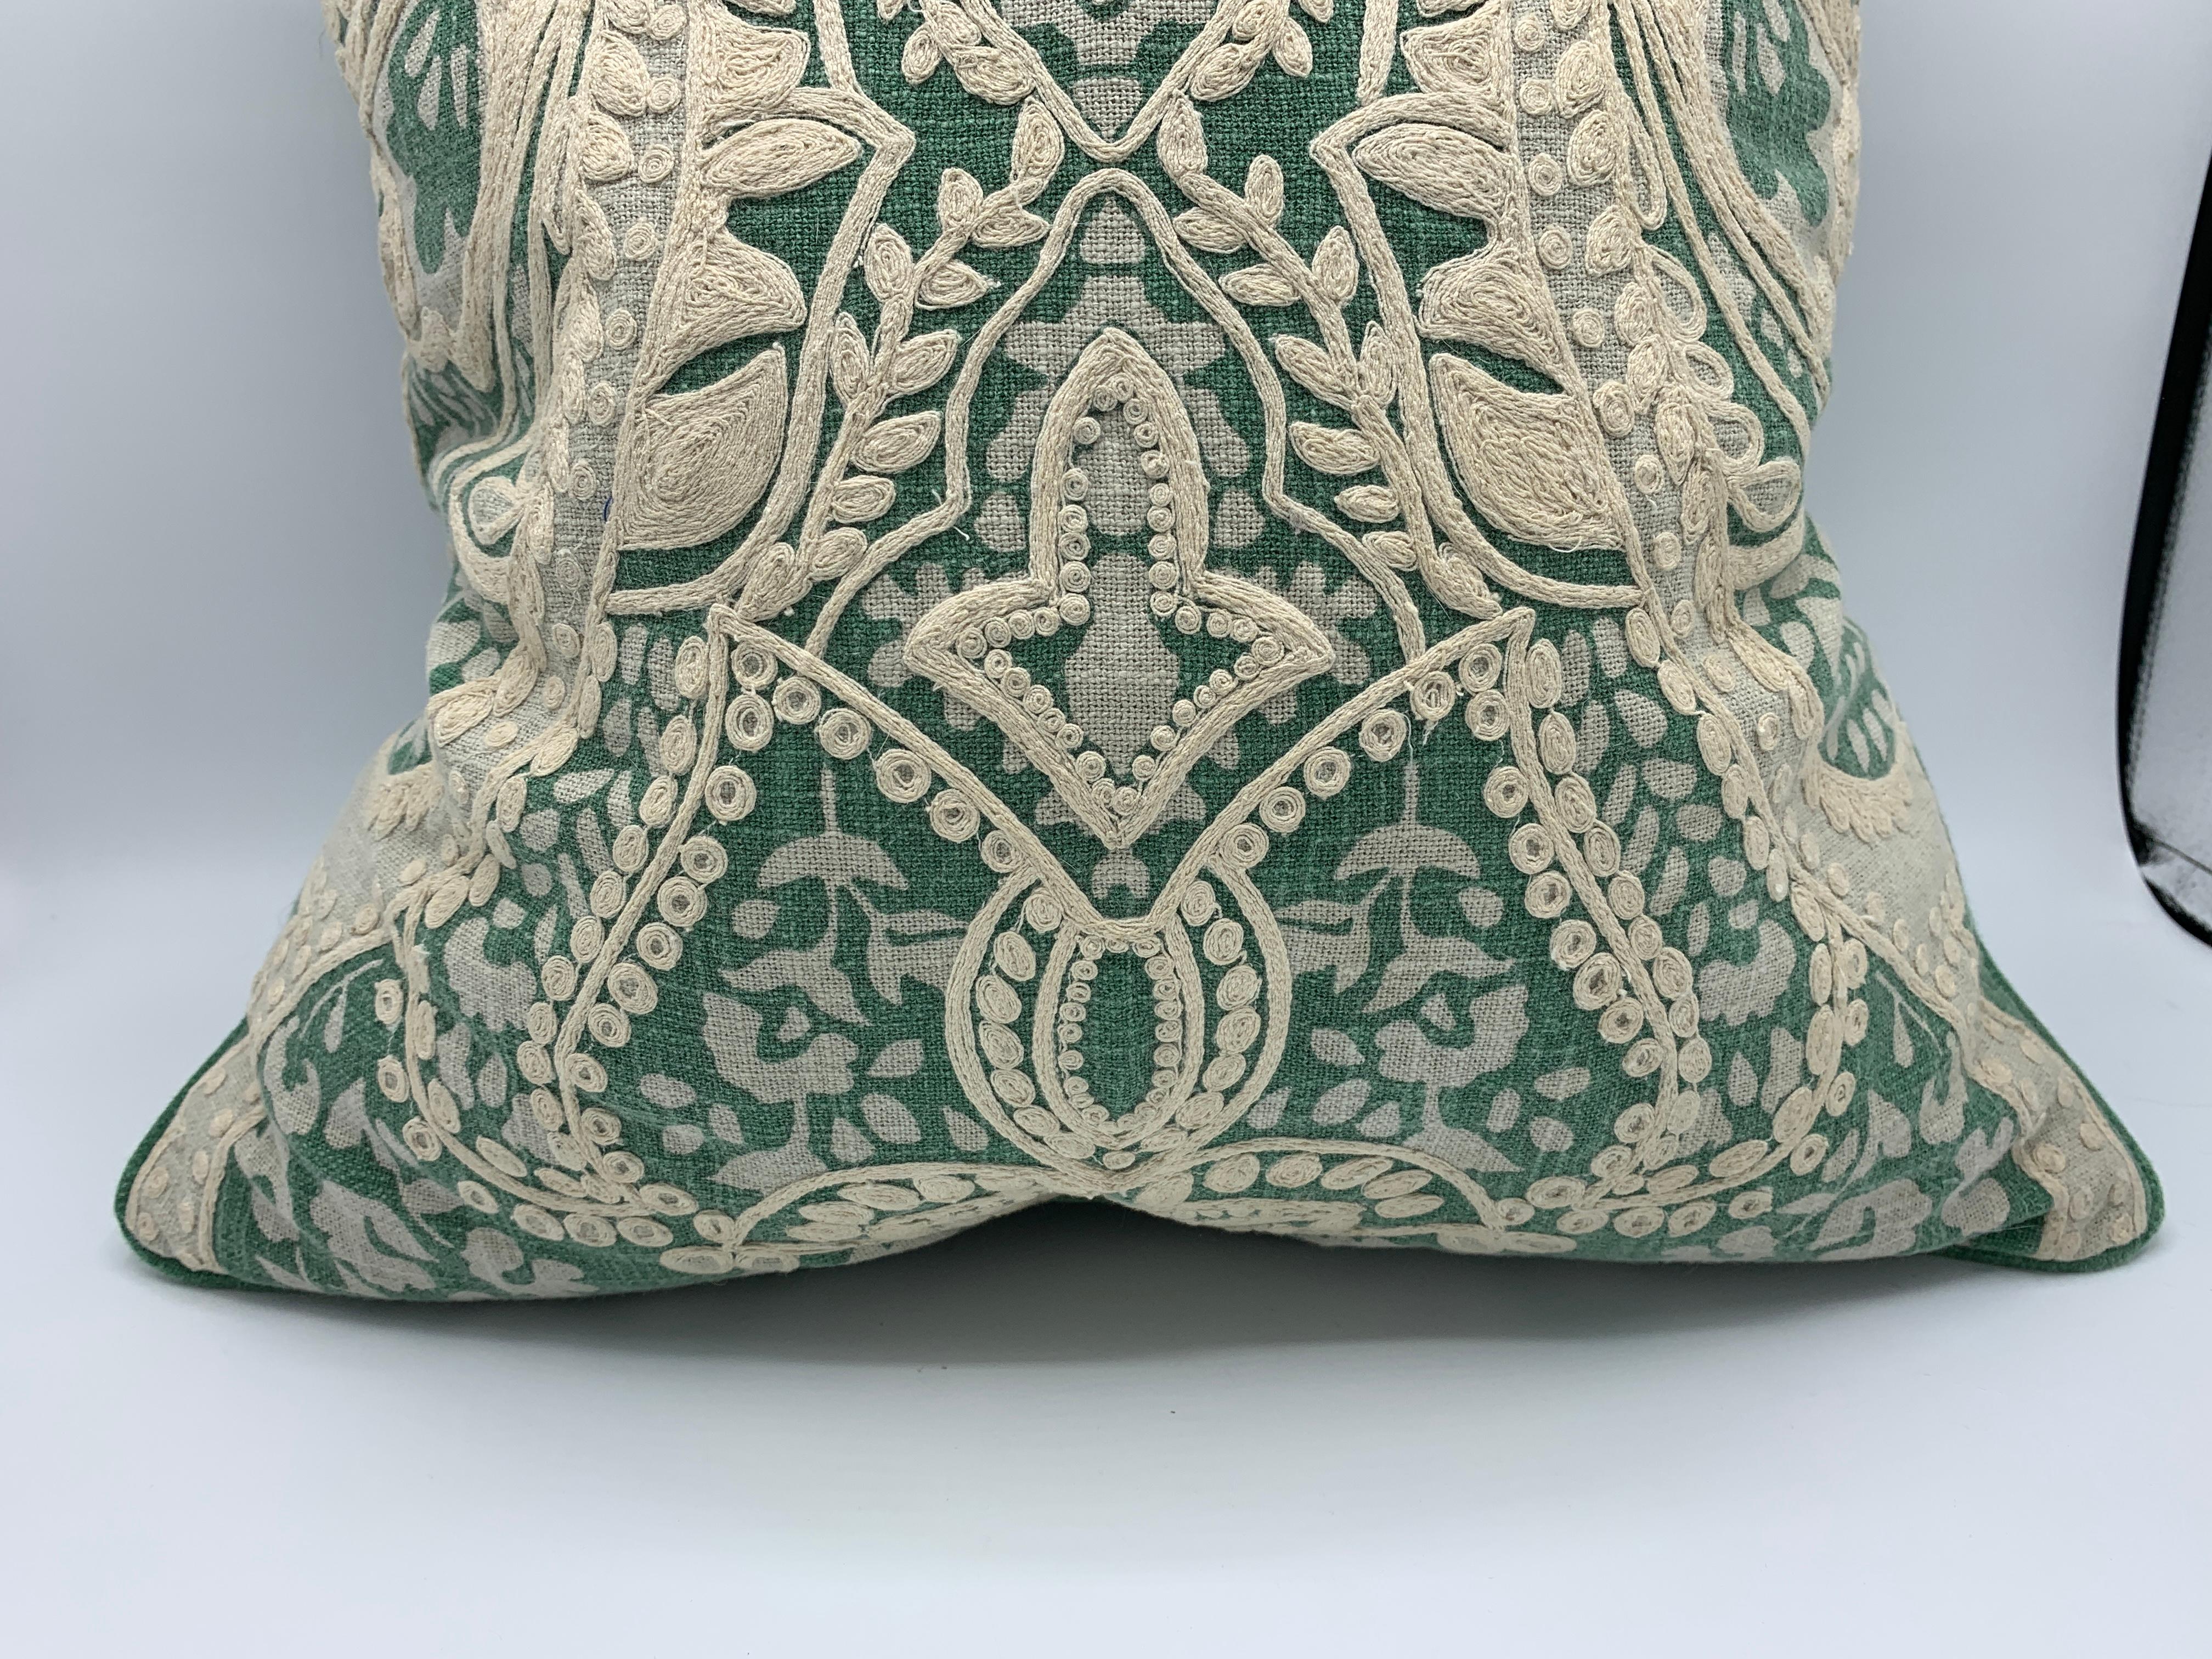 Embroidered Green and White Linen Pillows with Damask Embroidery, Pair For Sale